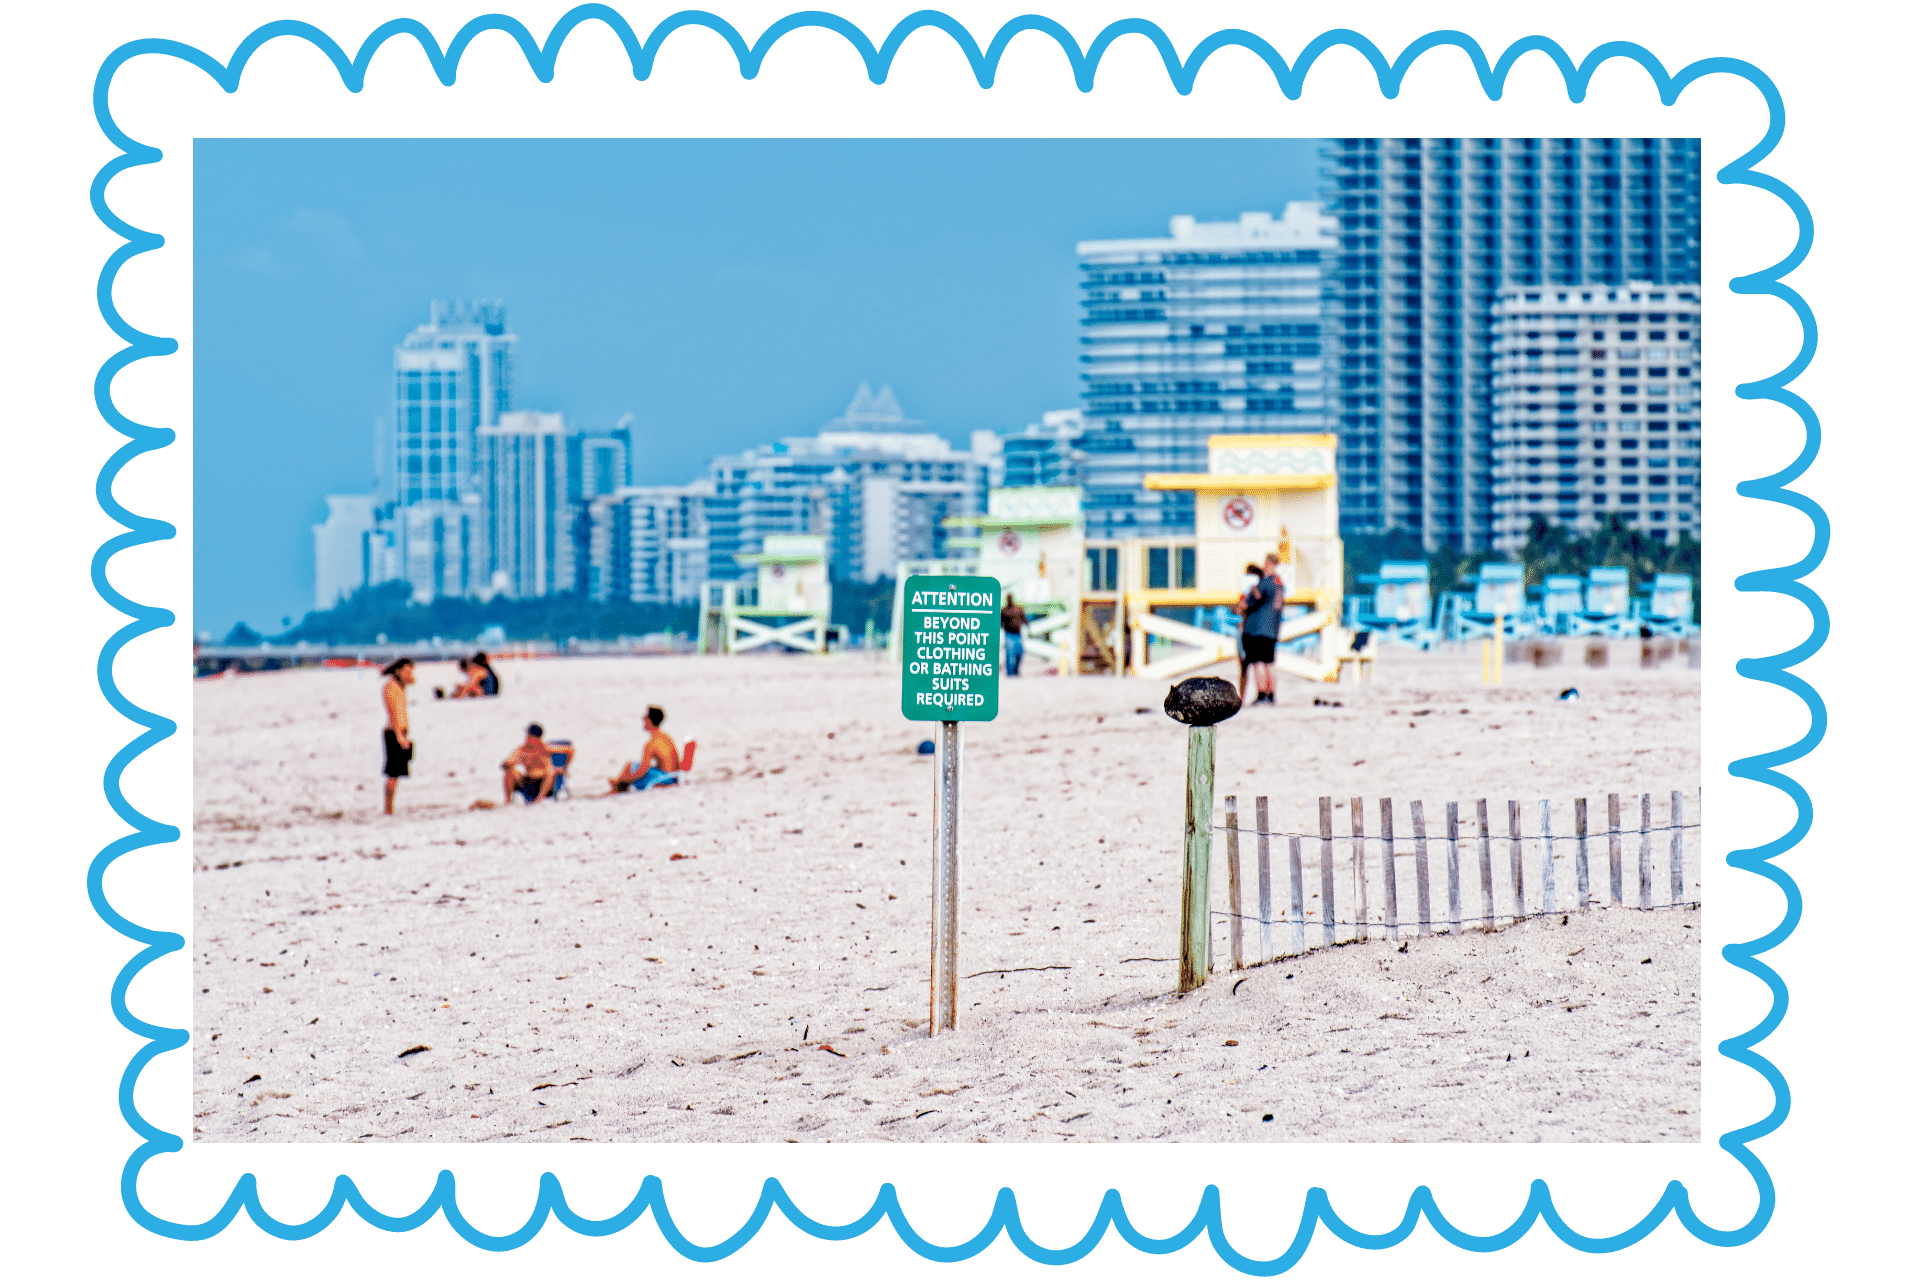 Haulover Beach in Florida is famous, and one of the world's best nudist beaches.